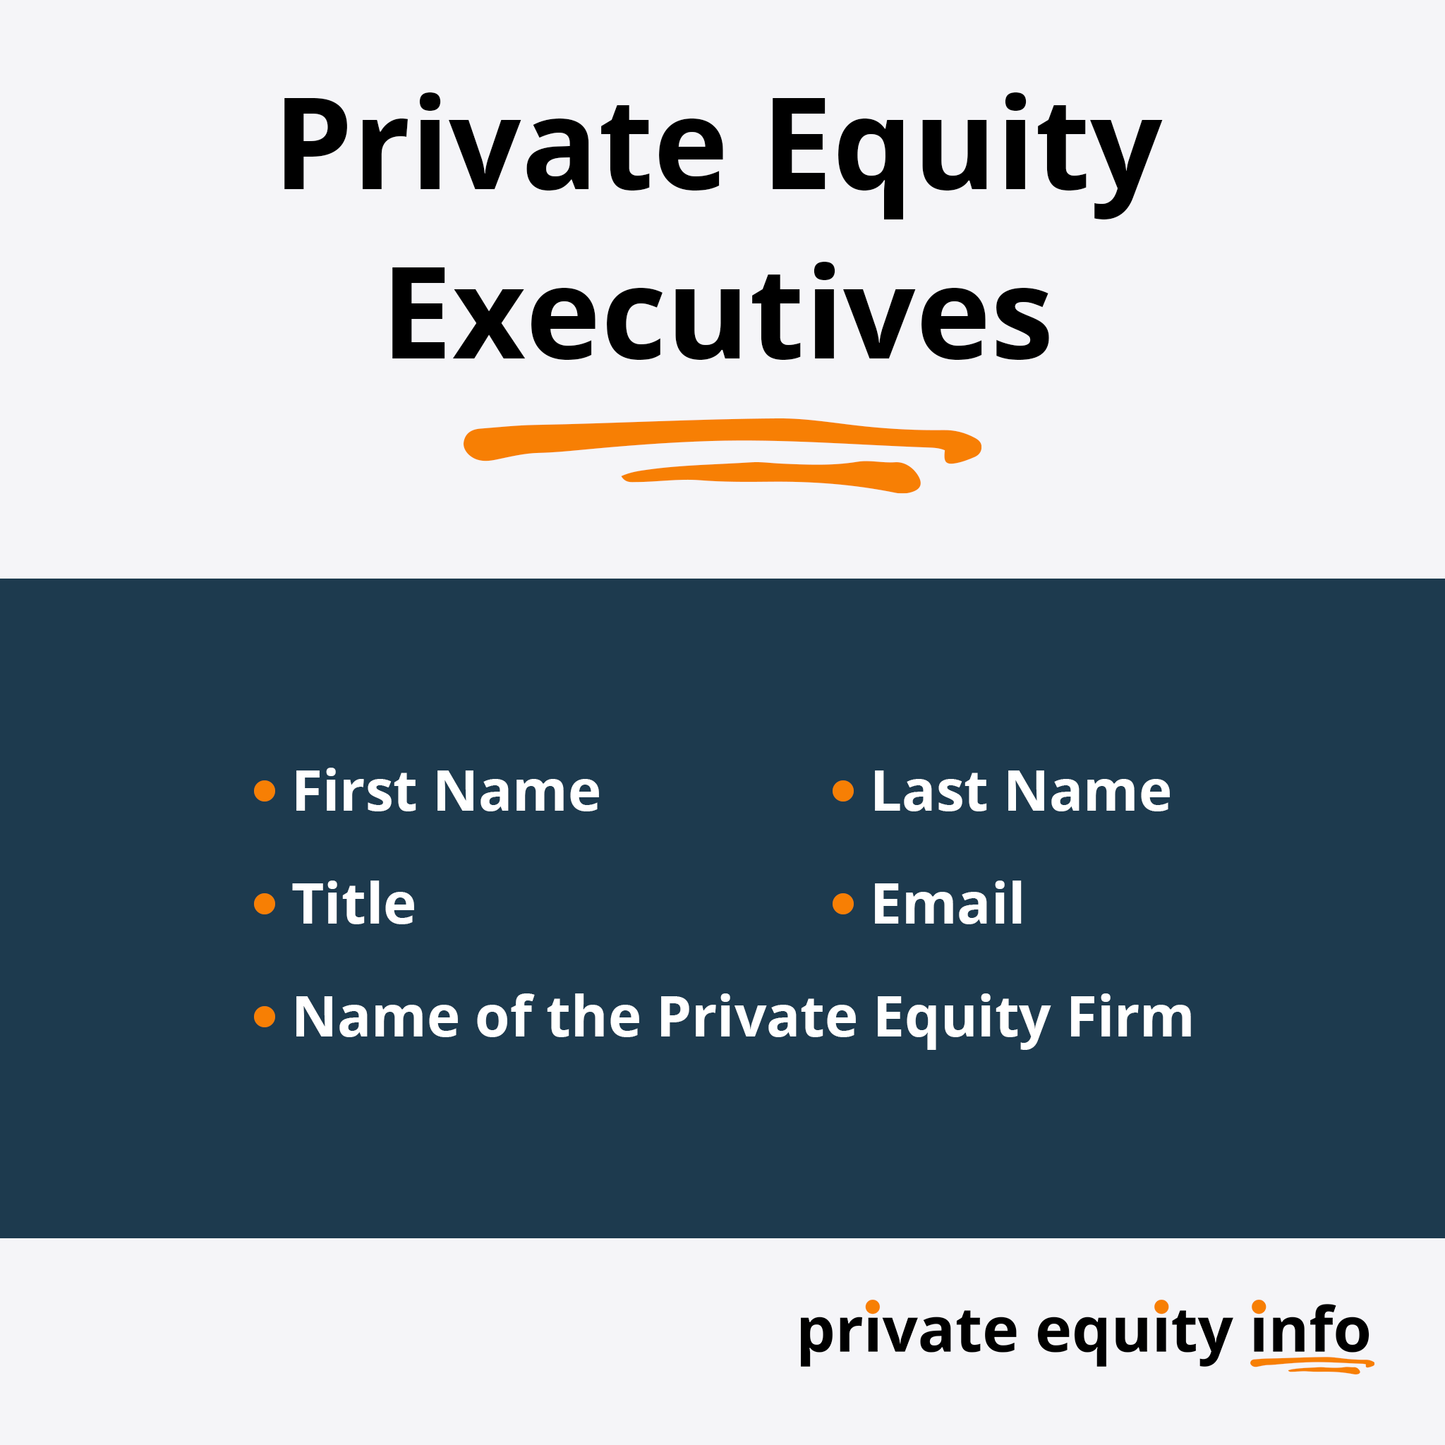 Private Equity Firms in Connecticut and Rhode Island